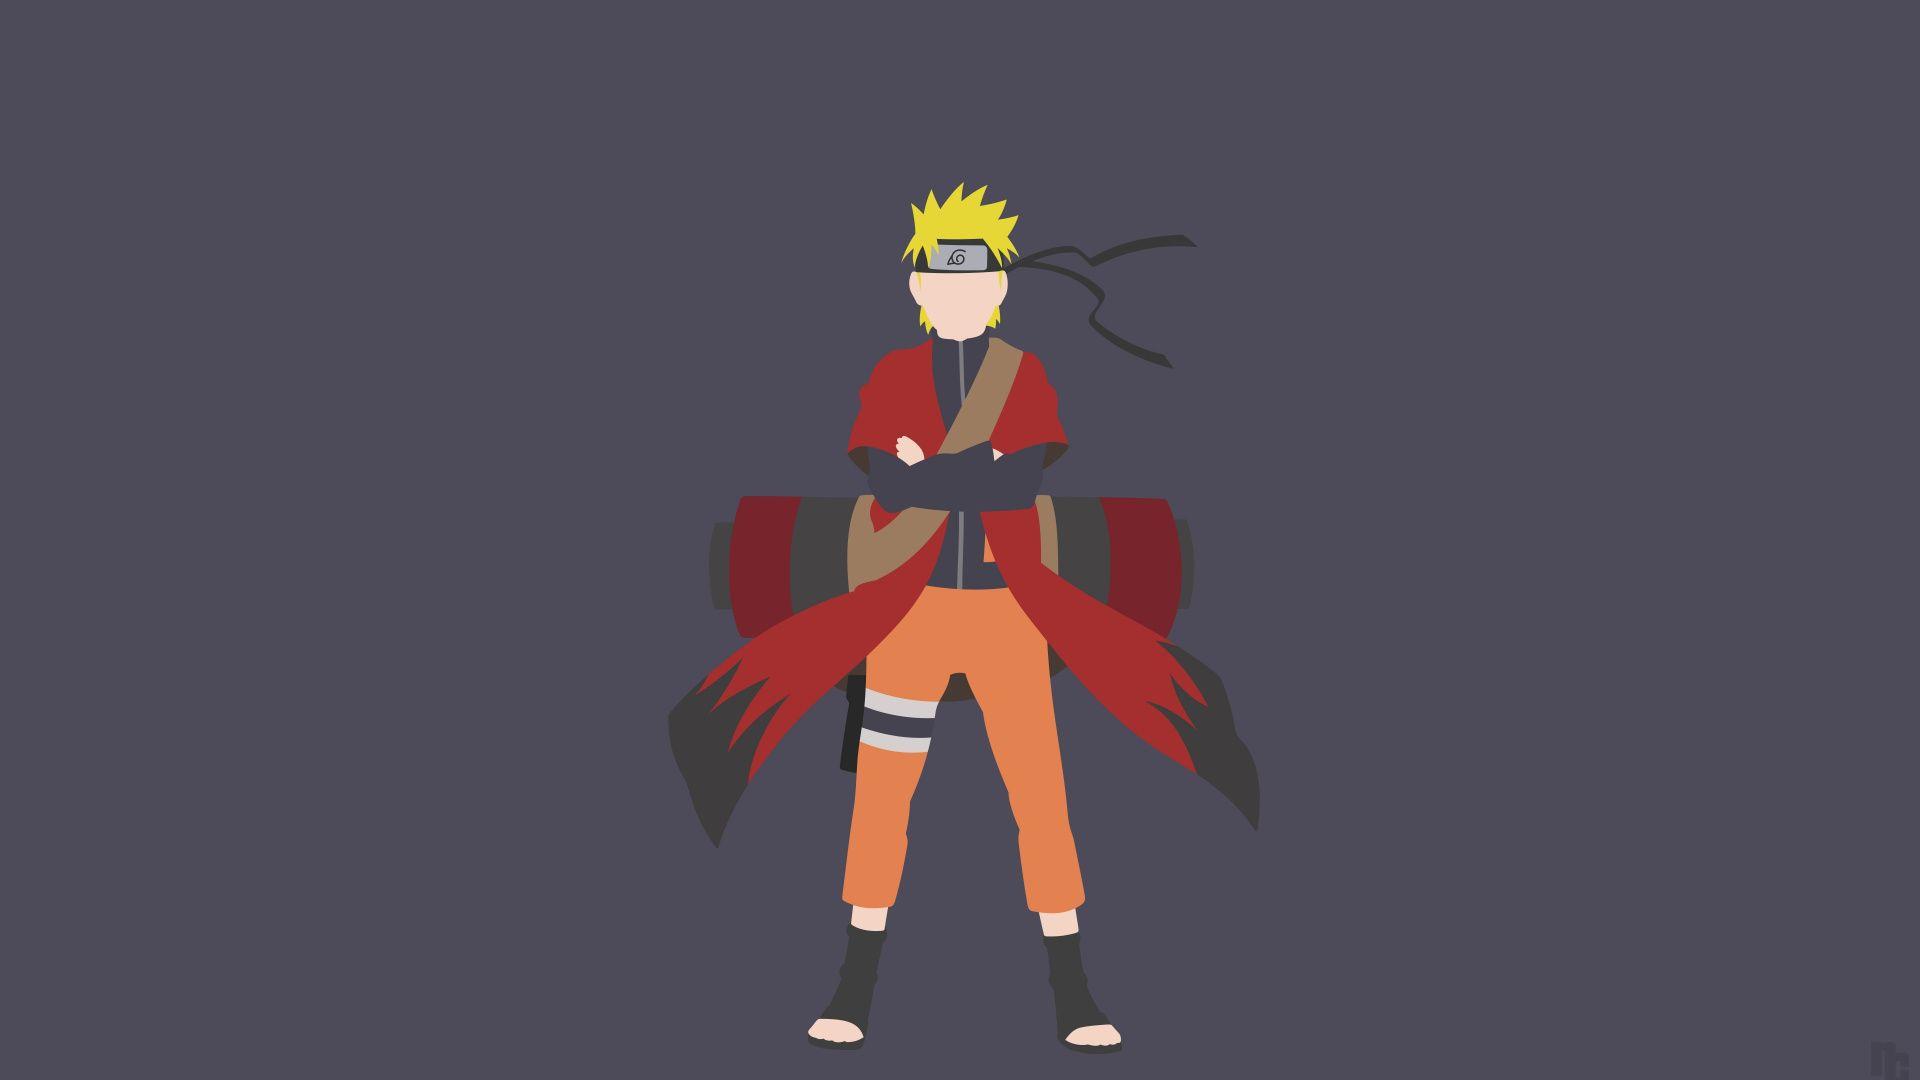 Some minimalist anime wallpapers I put together. [150x 1920x1200) x-post  from /r/Animewallpapers : r/anime